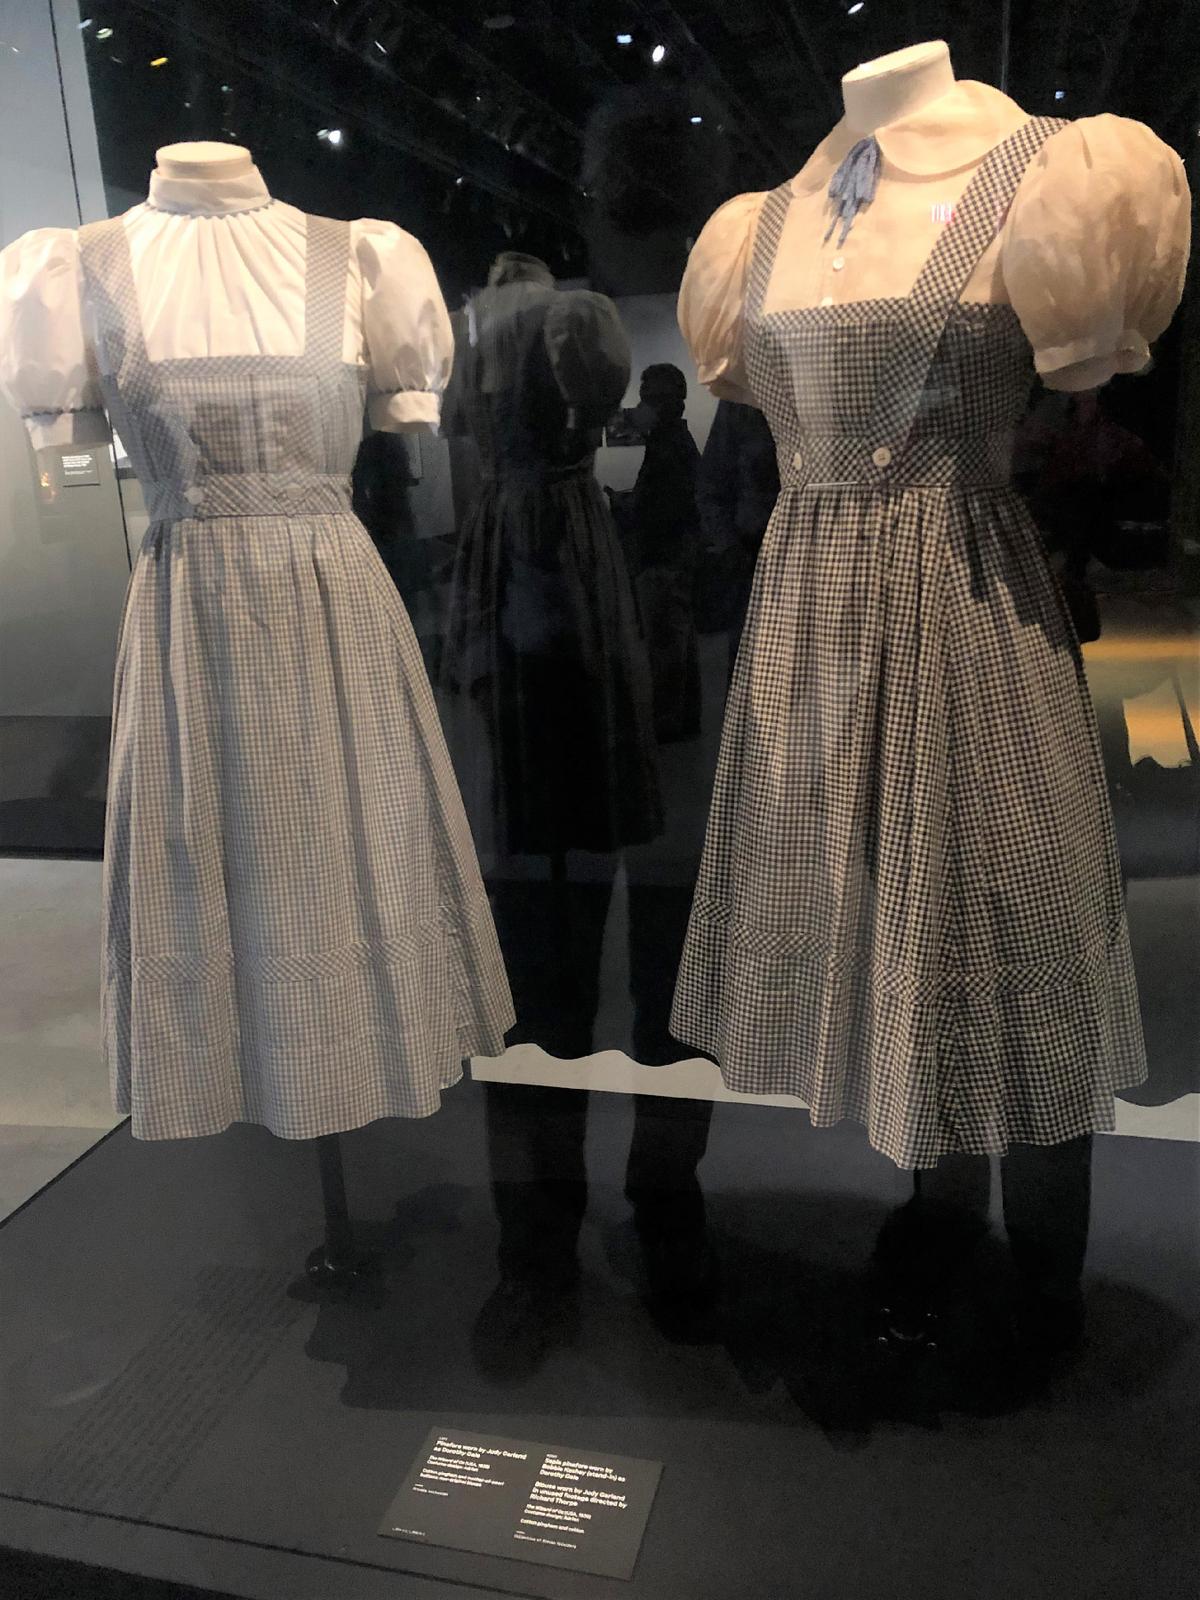 Dorothy's outfits from "The Wizard of Oz" are on display at the Academy Museum of Motion Pictures Arts and Sciences in Los Angeles. (Bill Neely)